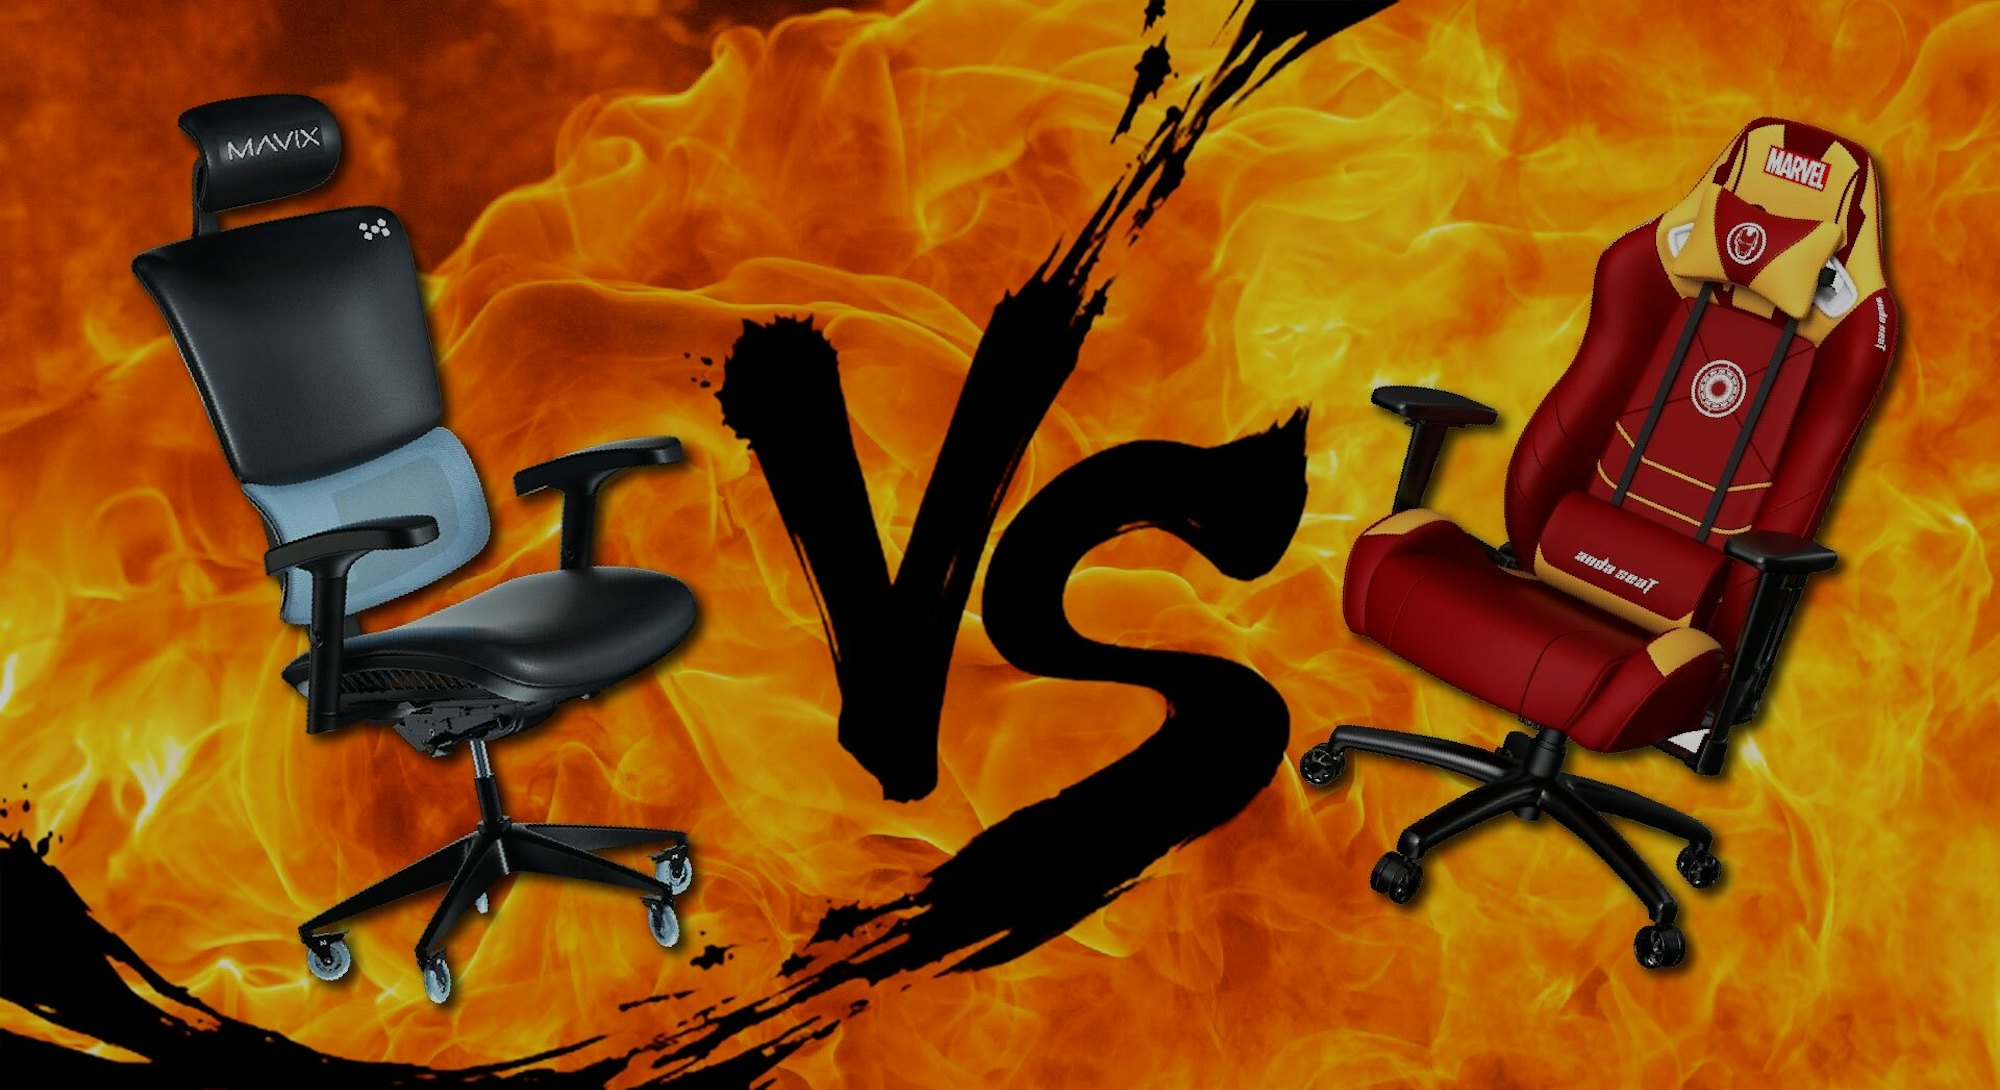 A fight between two gaming chairs.